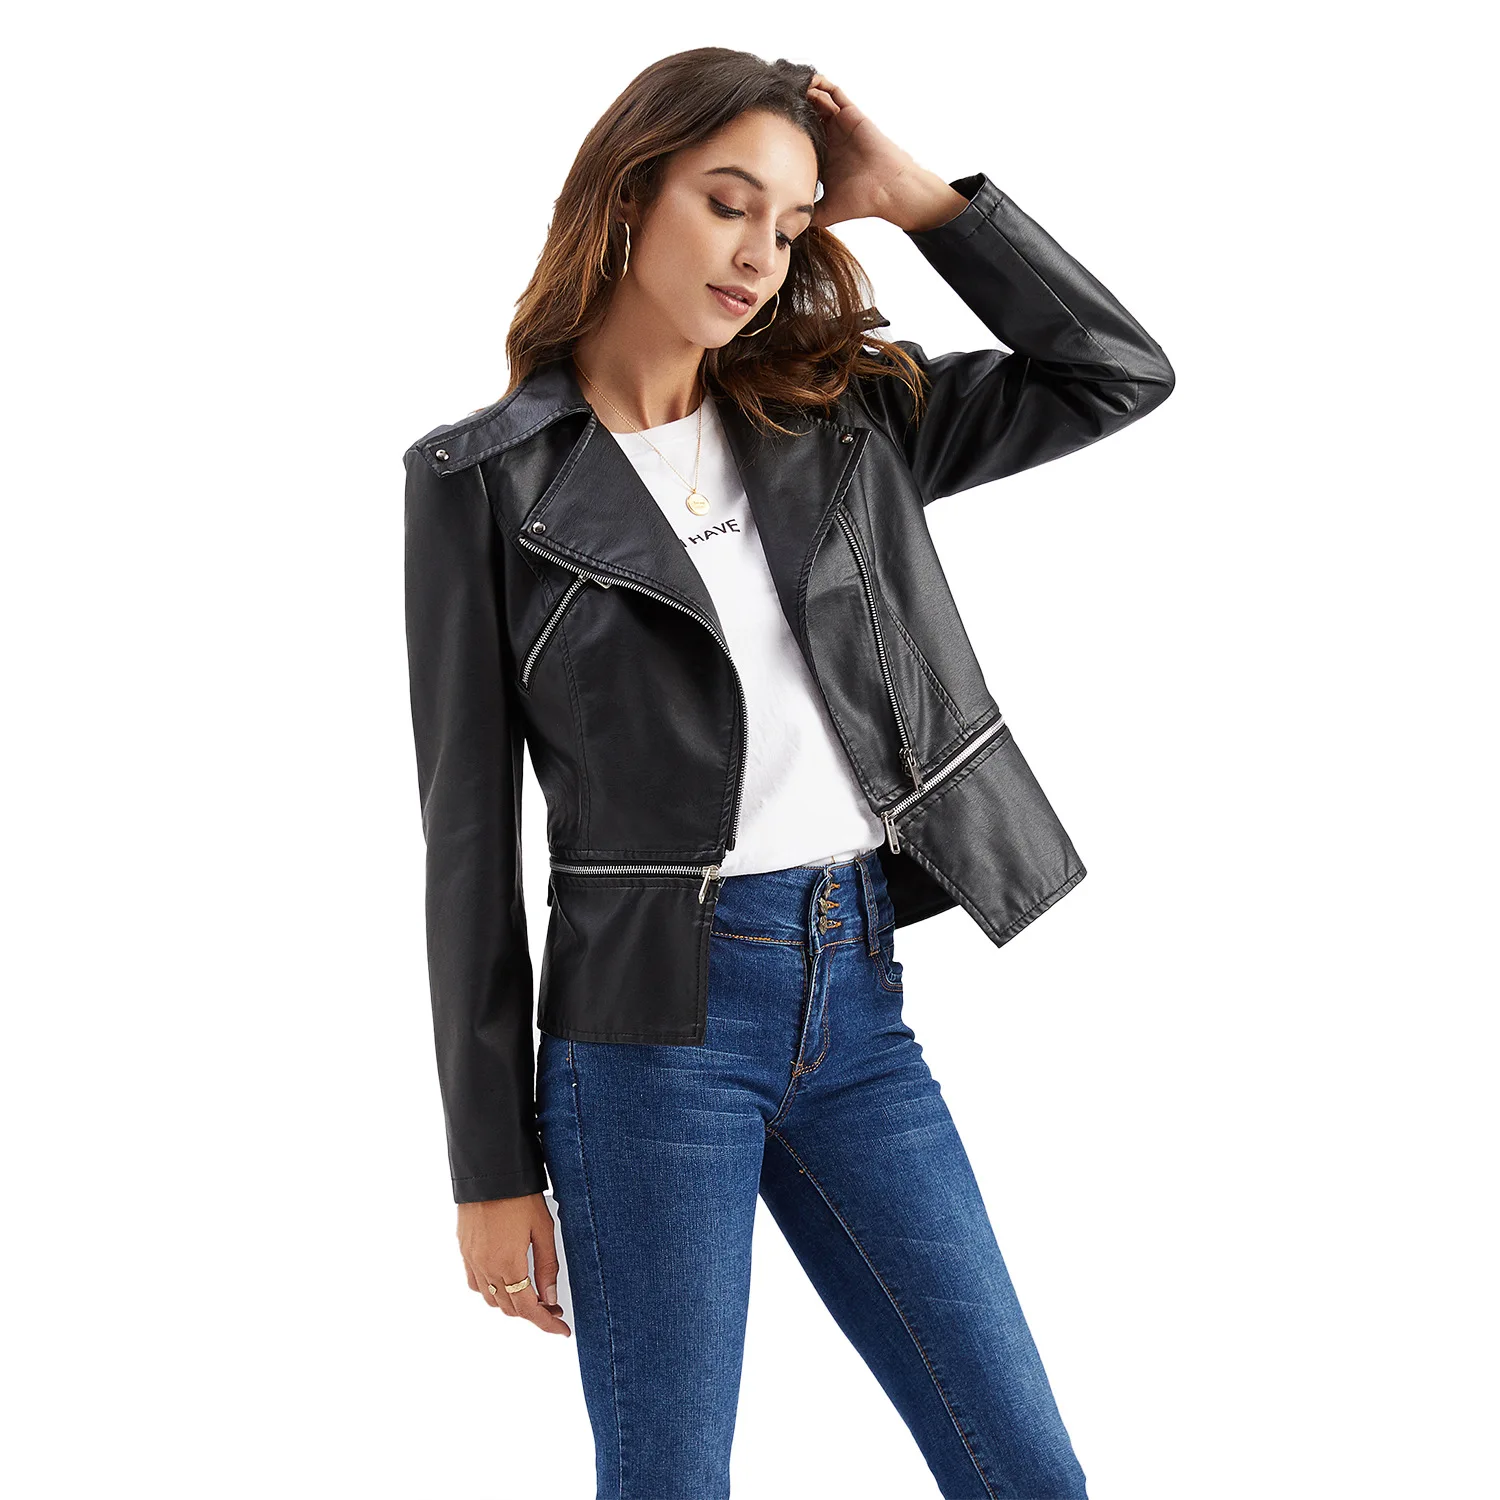 Women's Leisure Hem Detachable Leather Jacket, Spring and Autumn Coat, European and American Fashion, High-Quality Lapel Zipper, 2021 new women s washed pu leather clothes fashion lapel spring and autumn coat european and american casual lady s wear